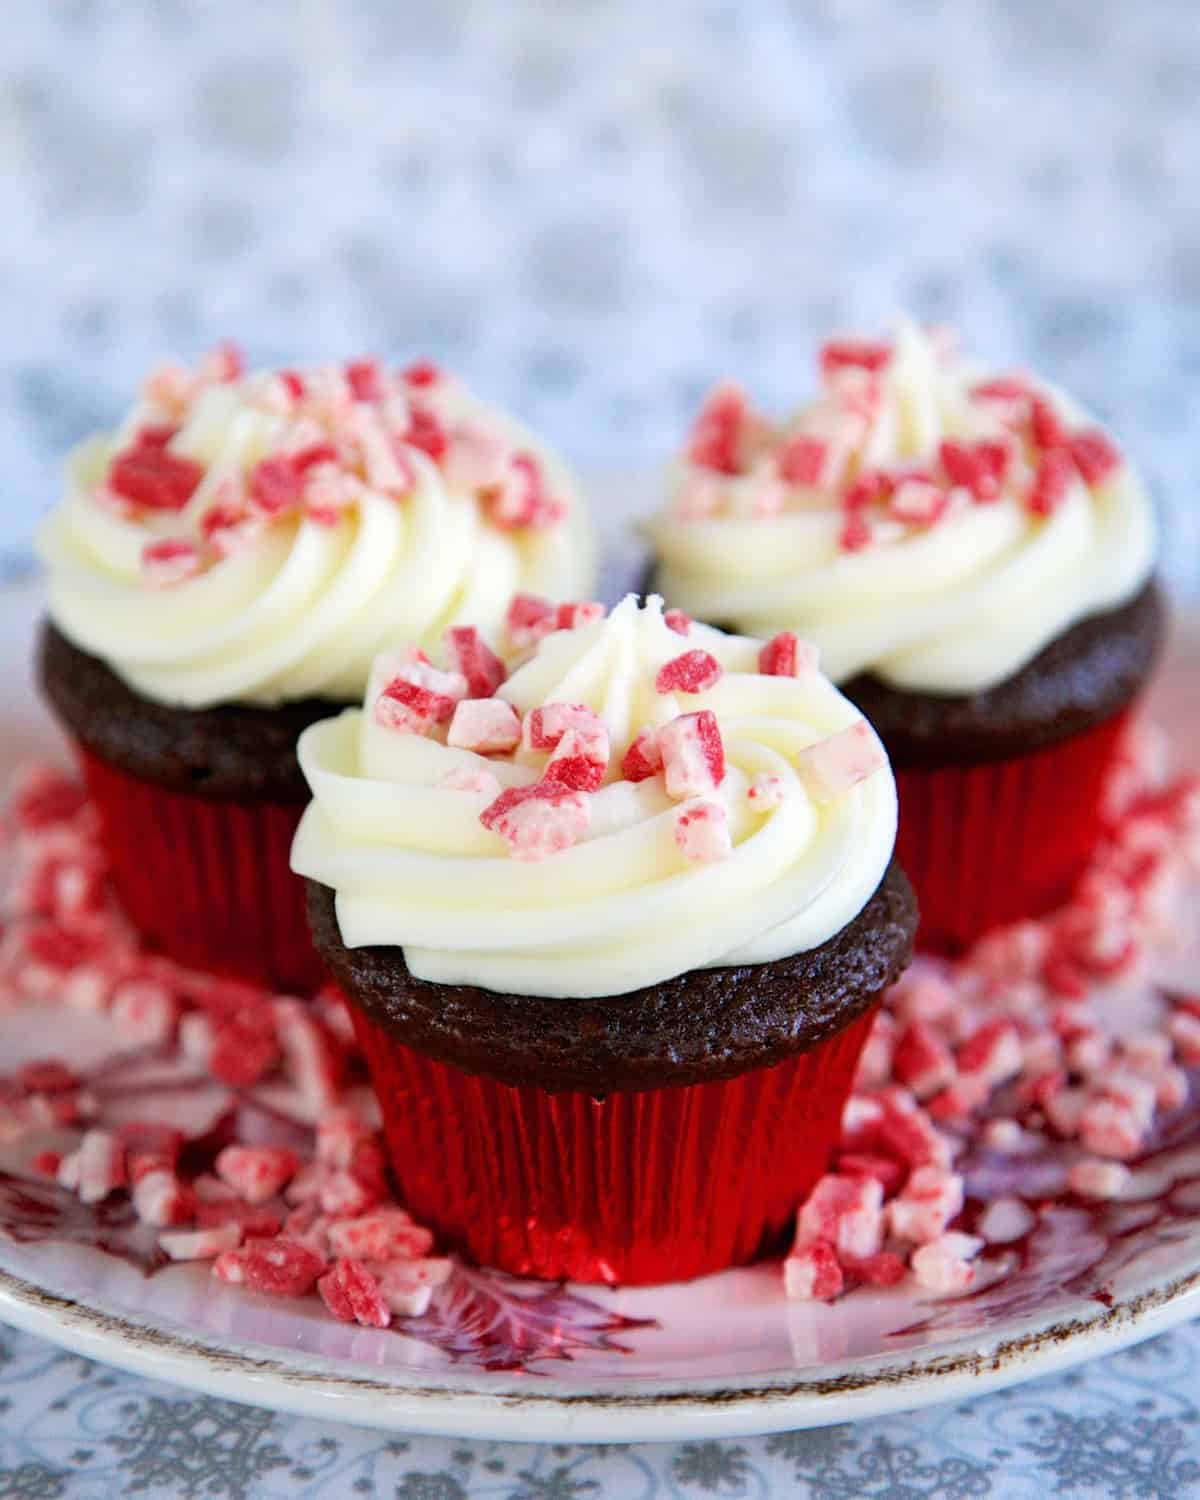 Peppermint Surprise Cupcakes - chocolate cupcakes with peppermint cake balls baked inside. Topped with homemade peppermint buttercream. The best cupcakes I've ever had!